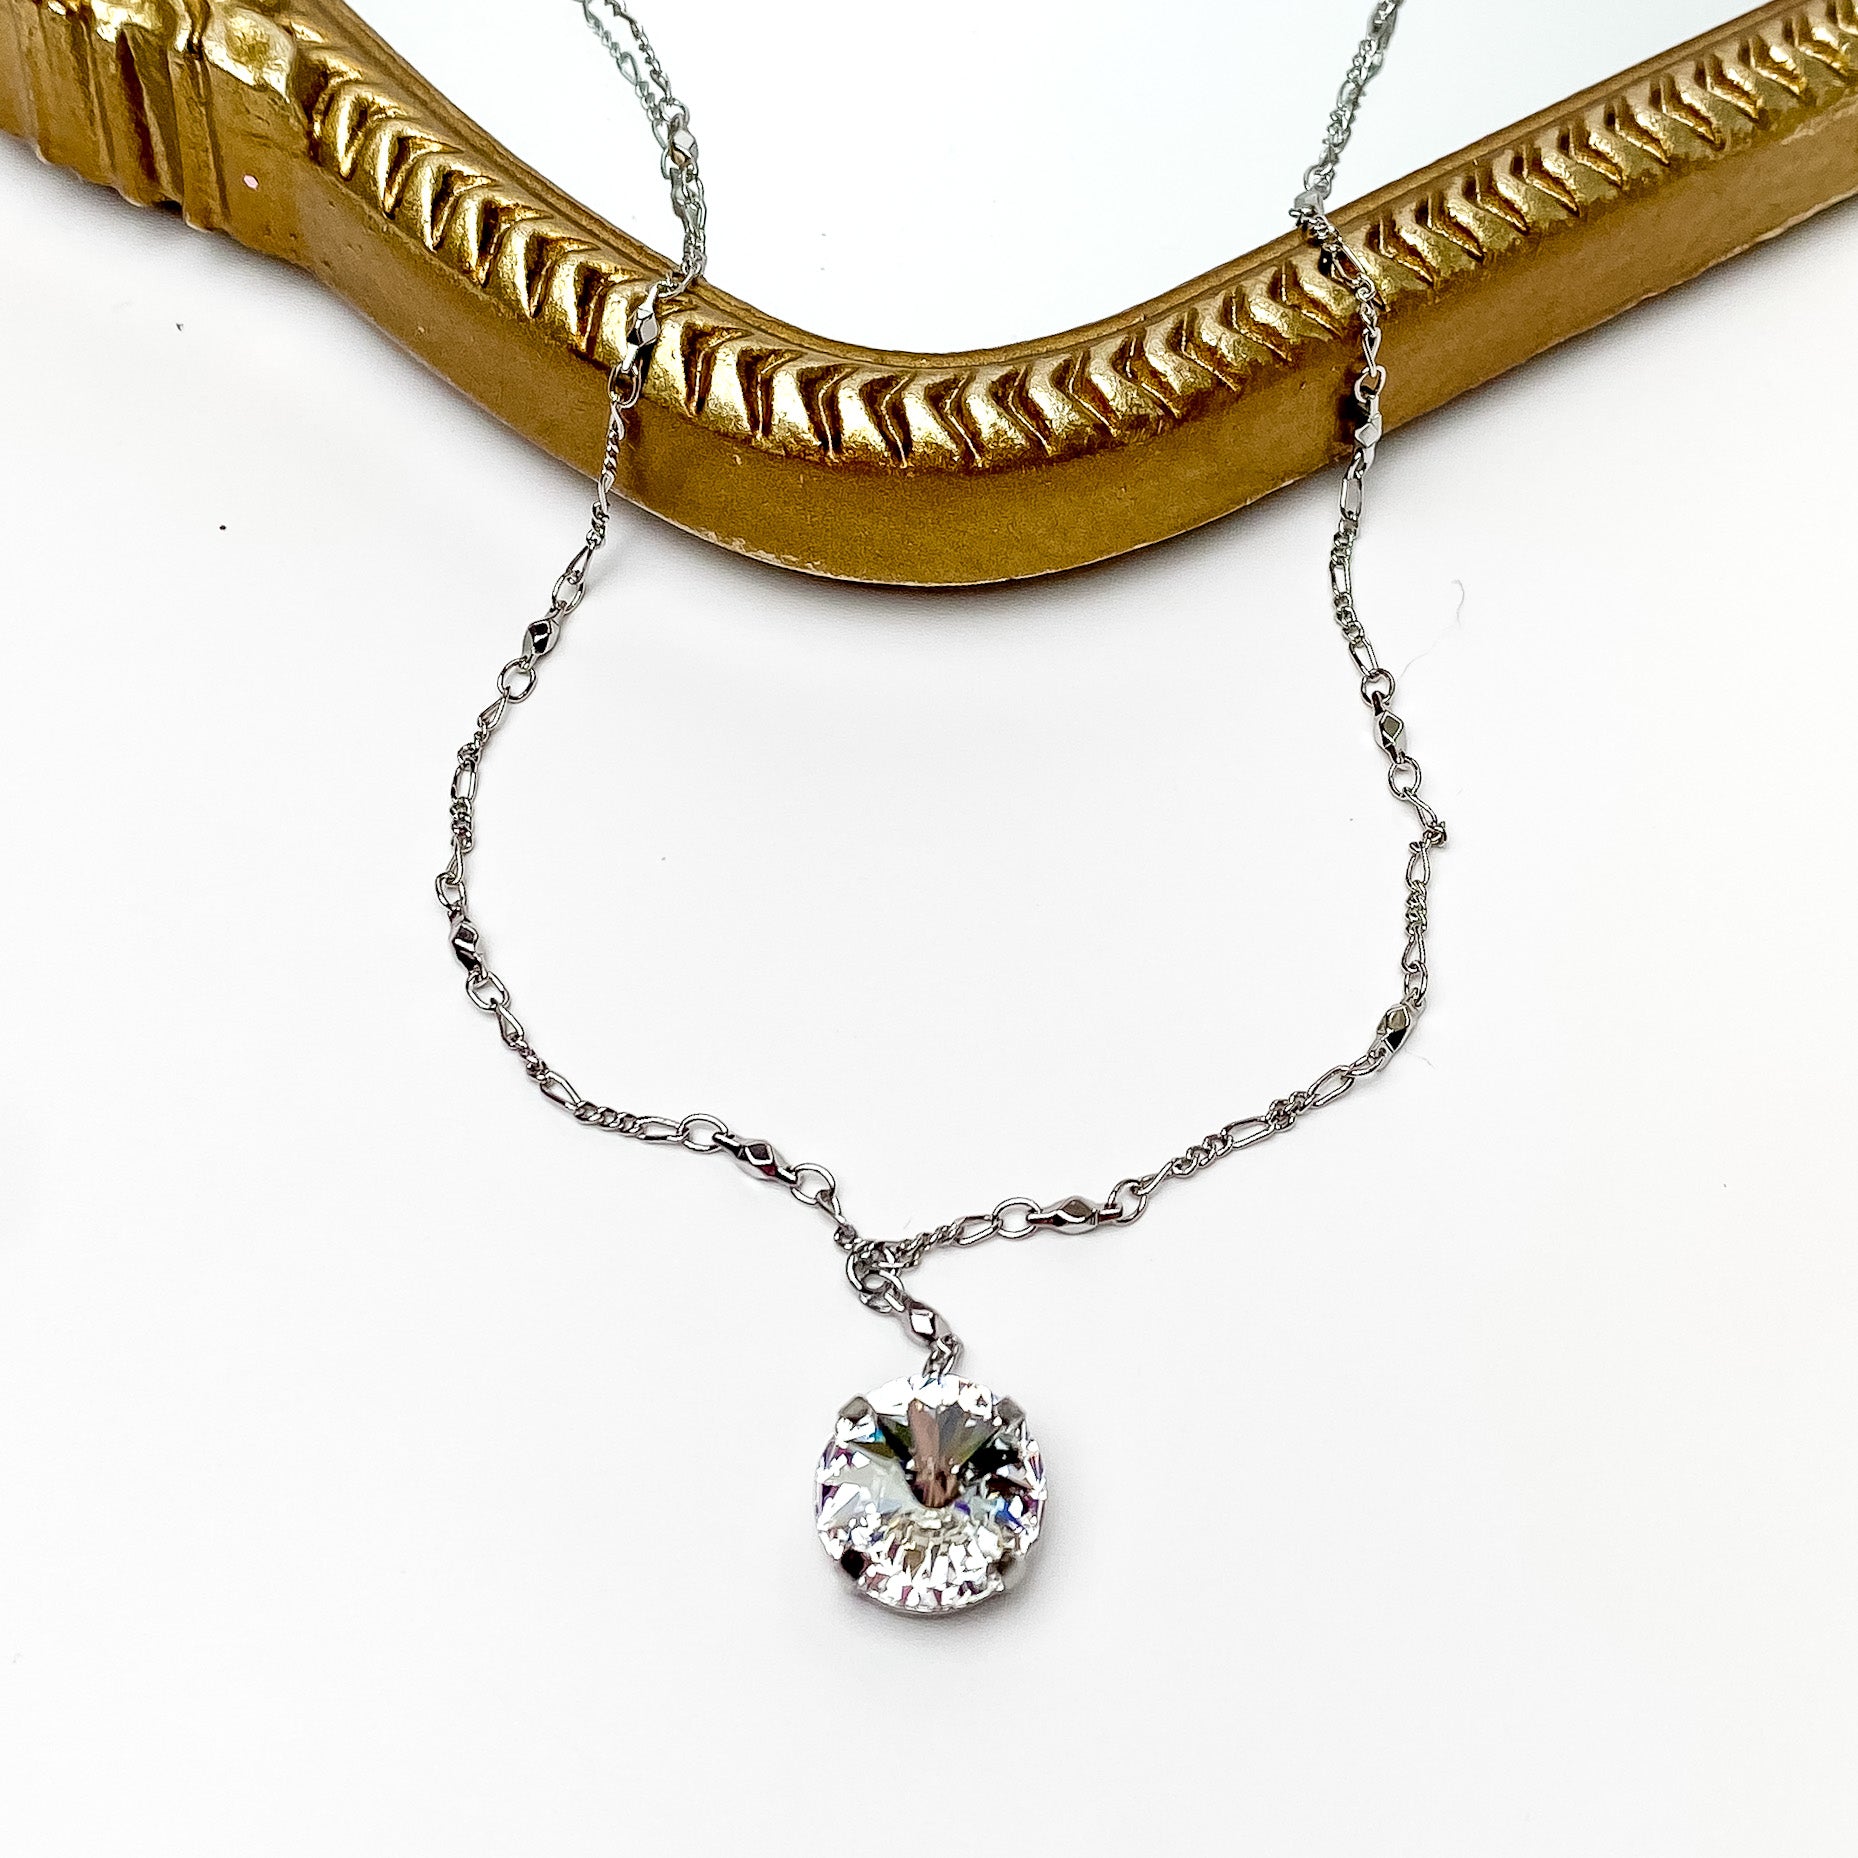 Pictured is a silver necklace with a clear crystal pendant. This necklace is pictured laying partially on a gold mirror on a white background. 